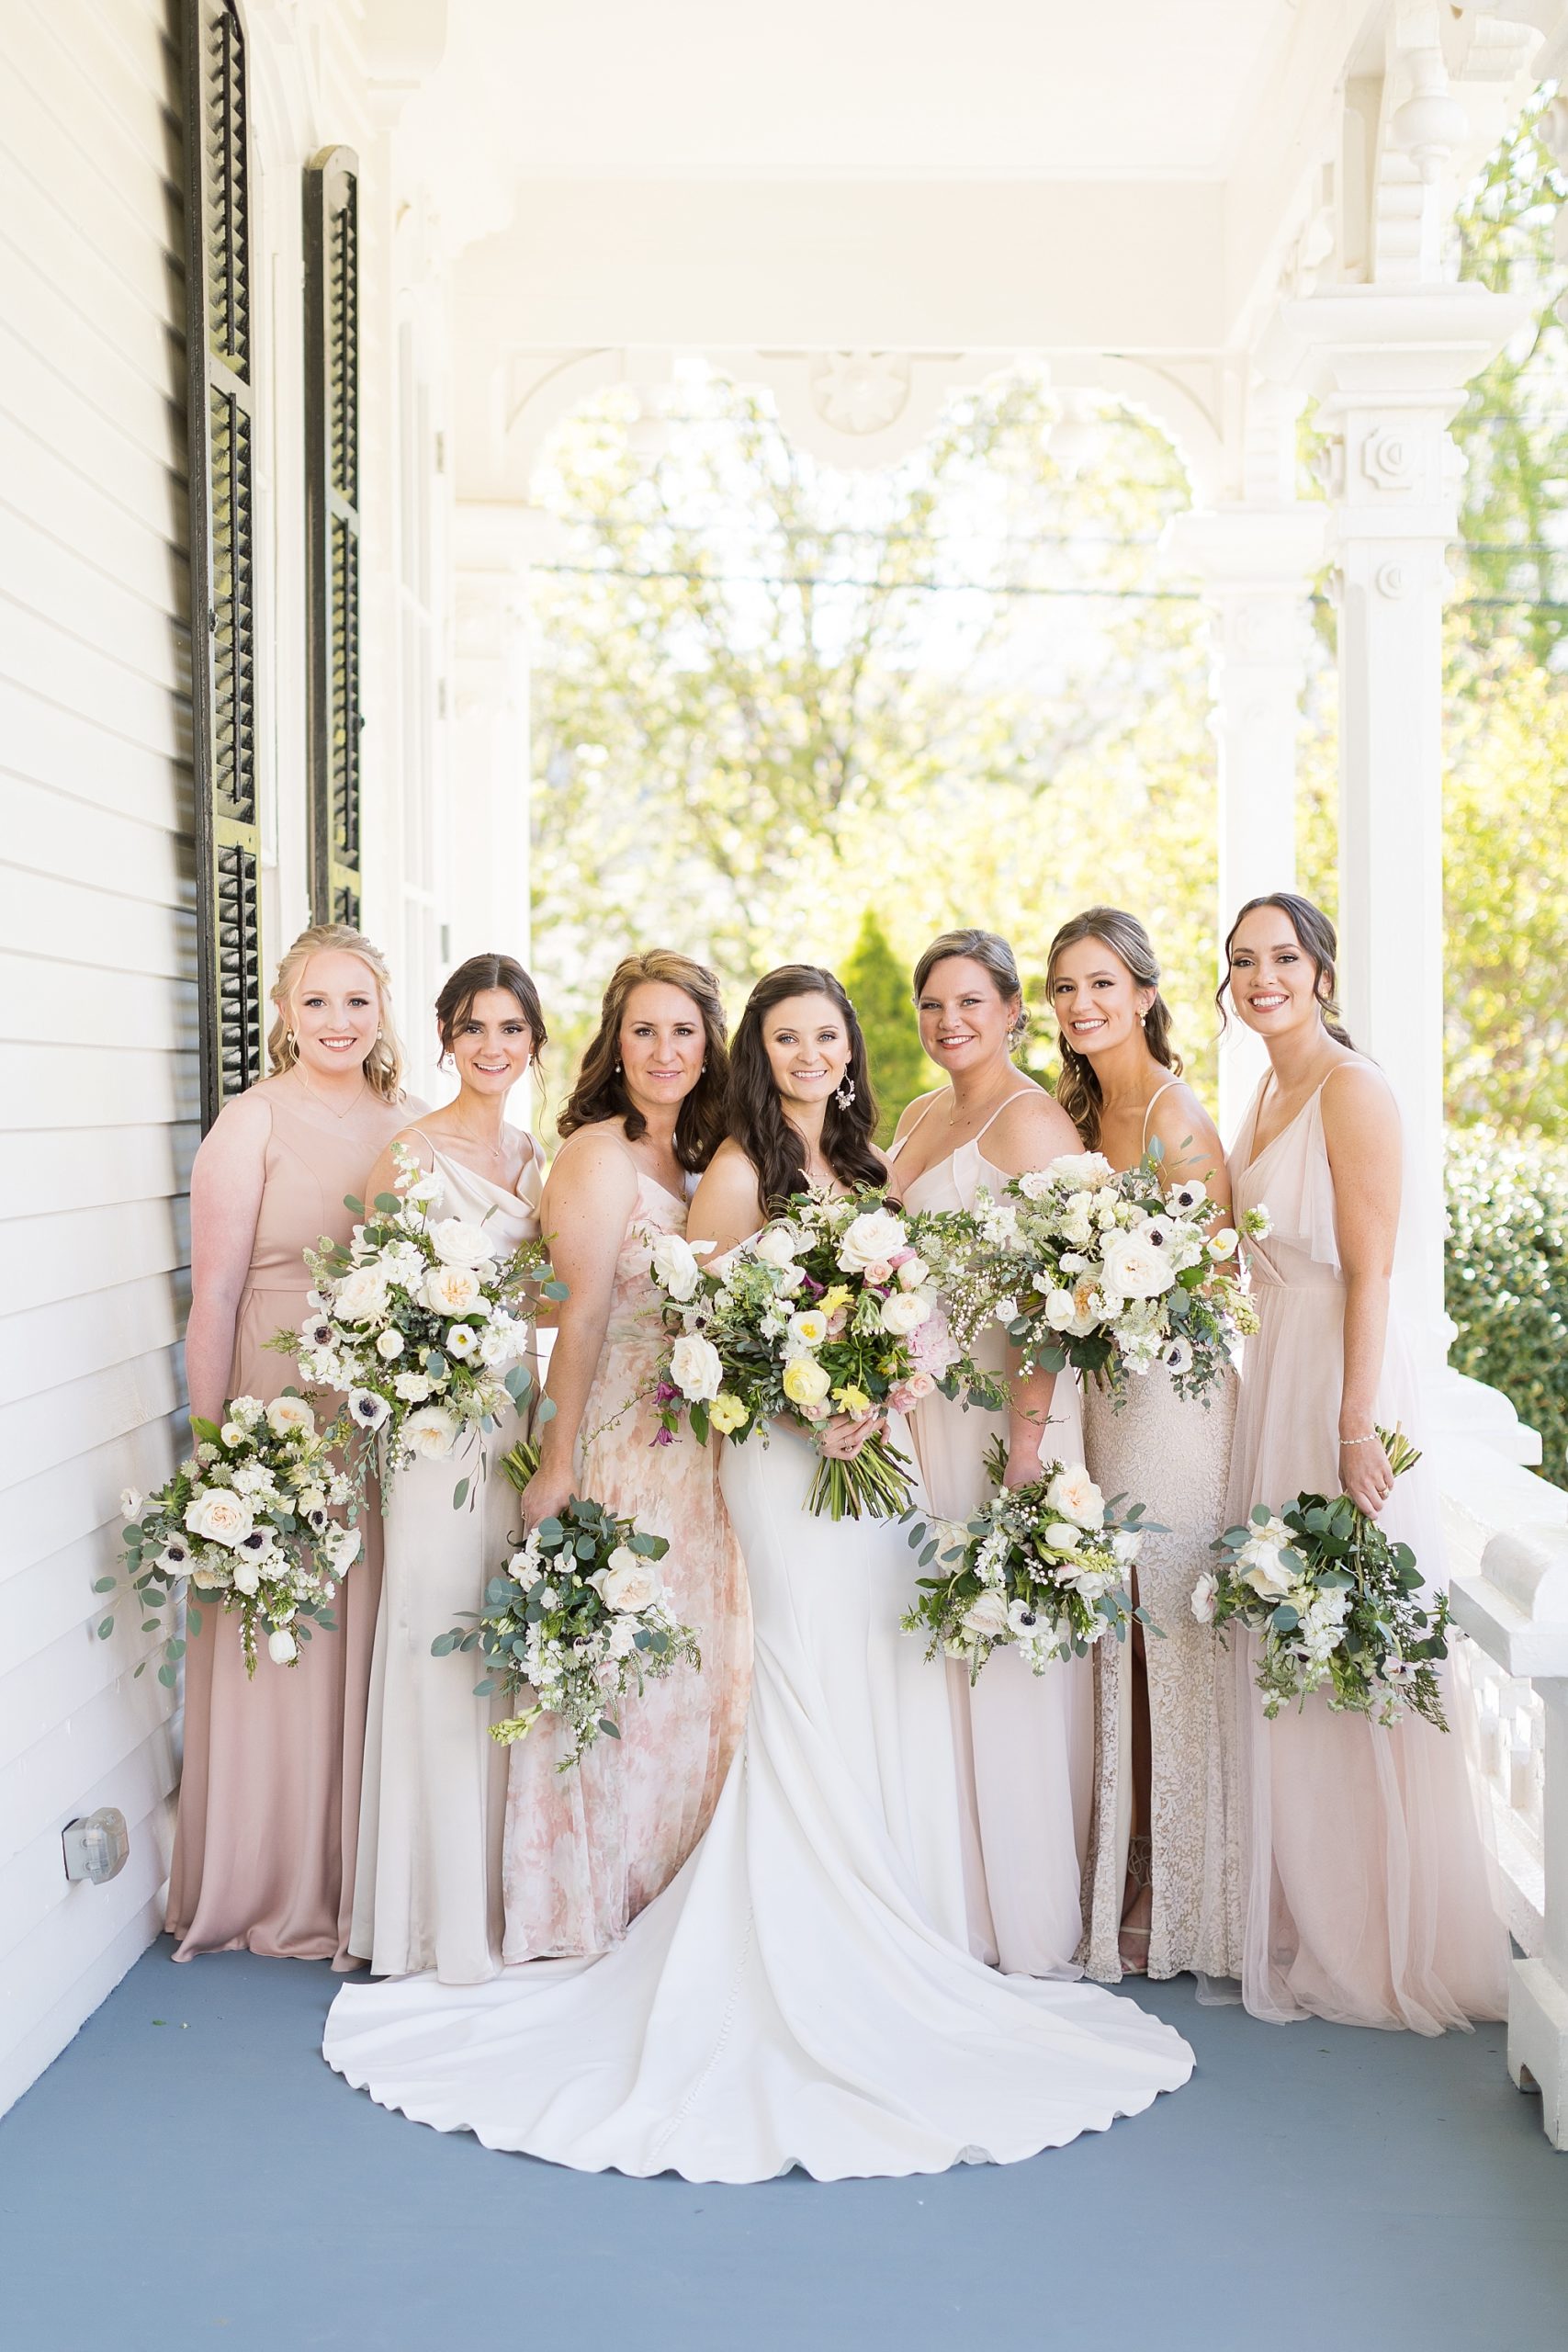 Blush bridesmaids dresses in a variety of colors with white and pink spring florals  | Merrimon Wynne Wedding | Sarah Hinckley Photography | Raleigh NC Wedding Photographer